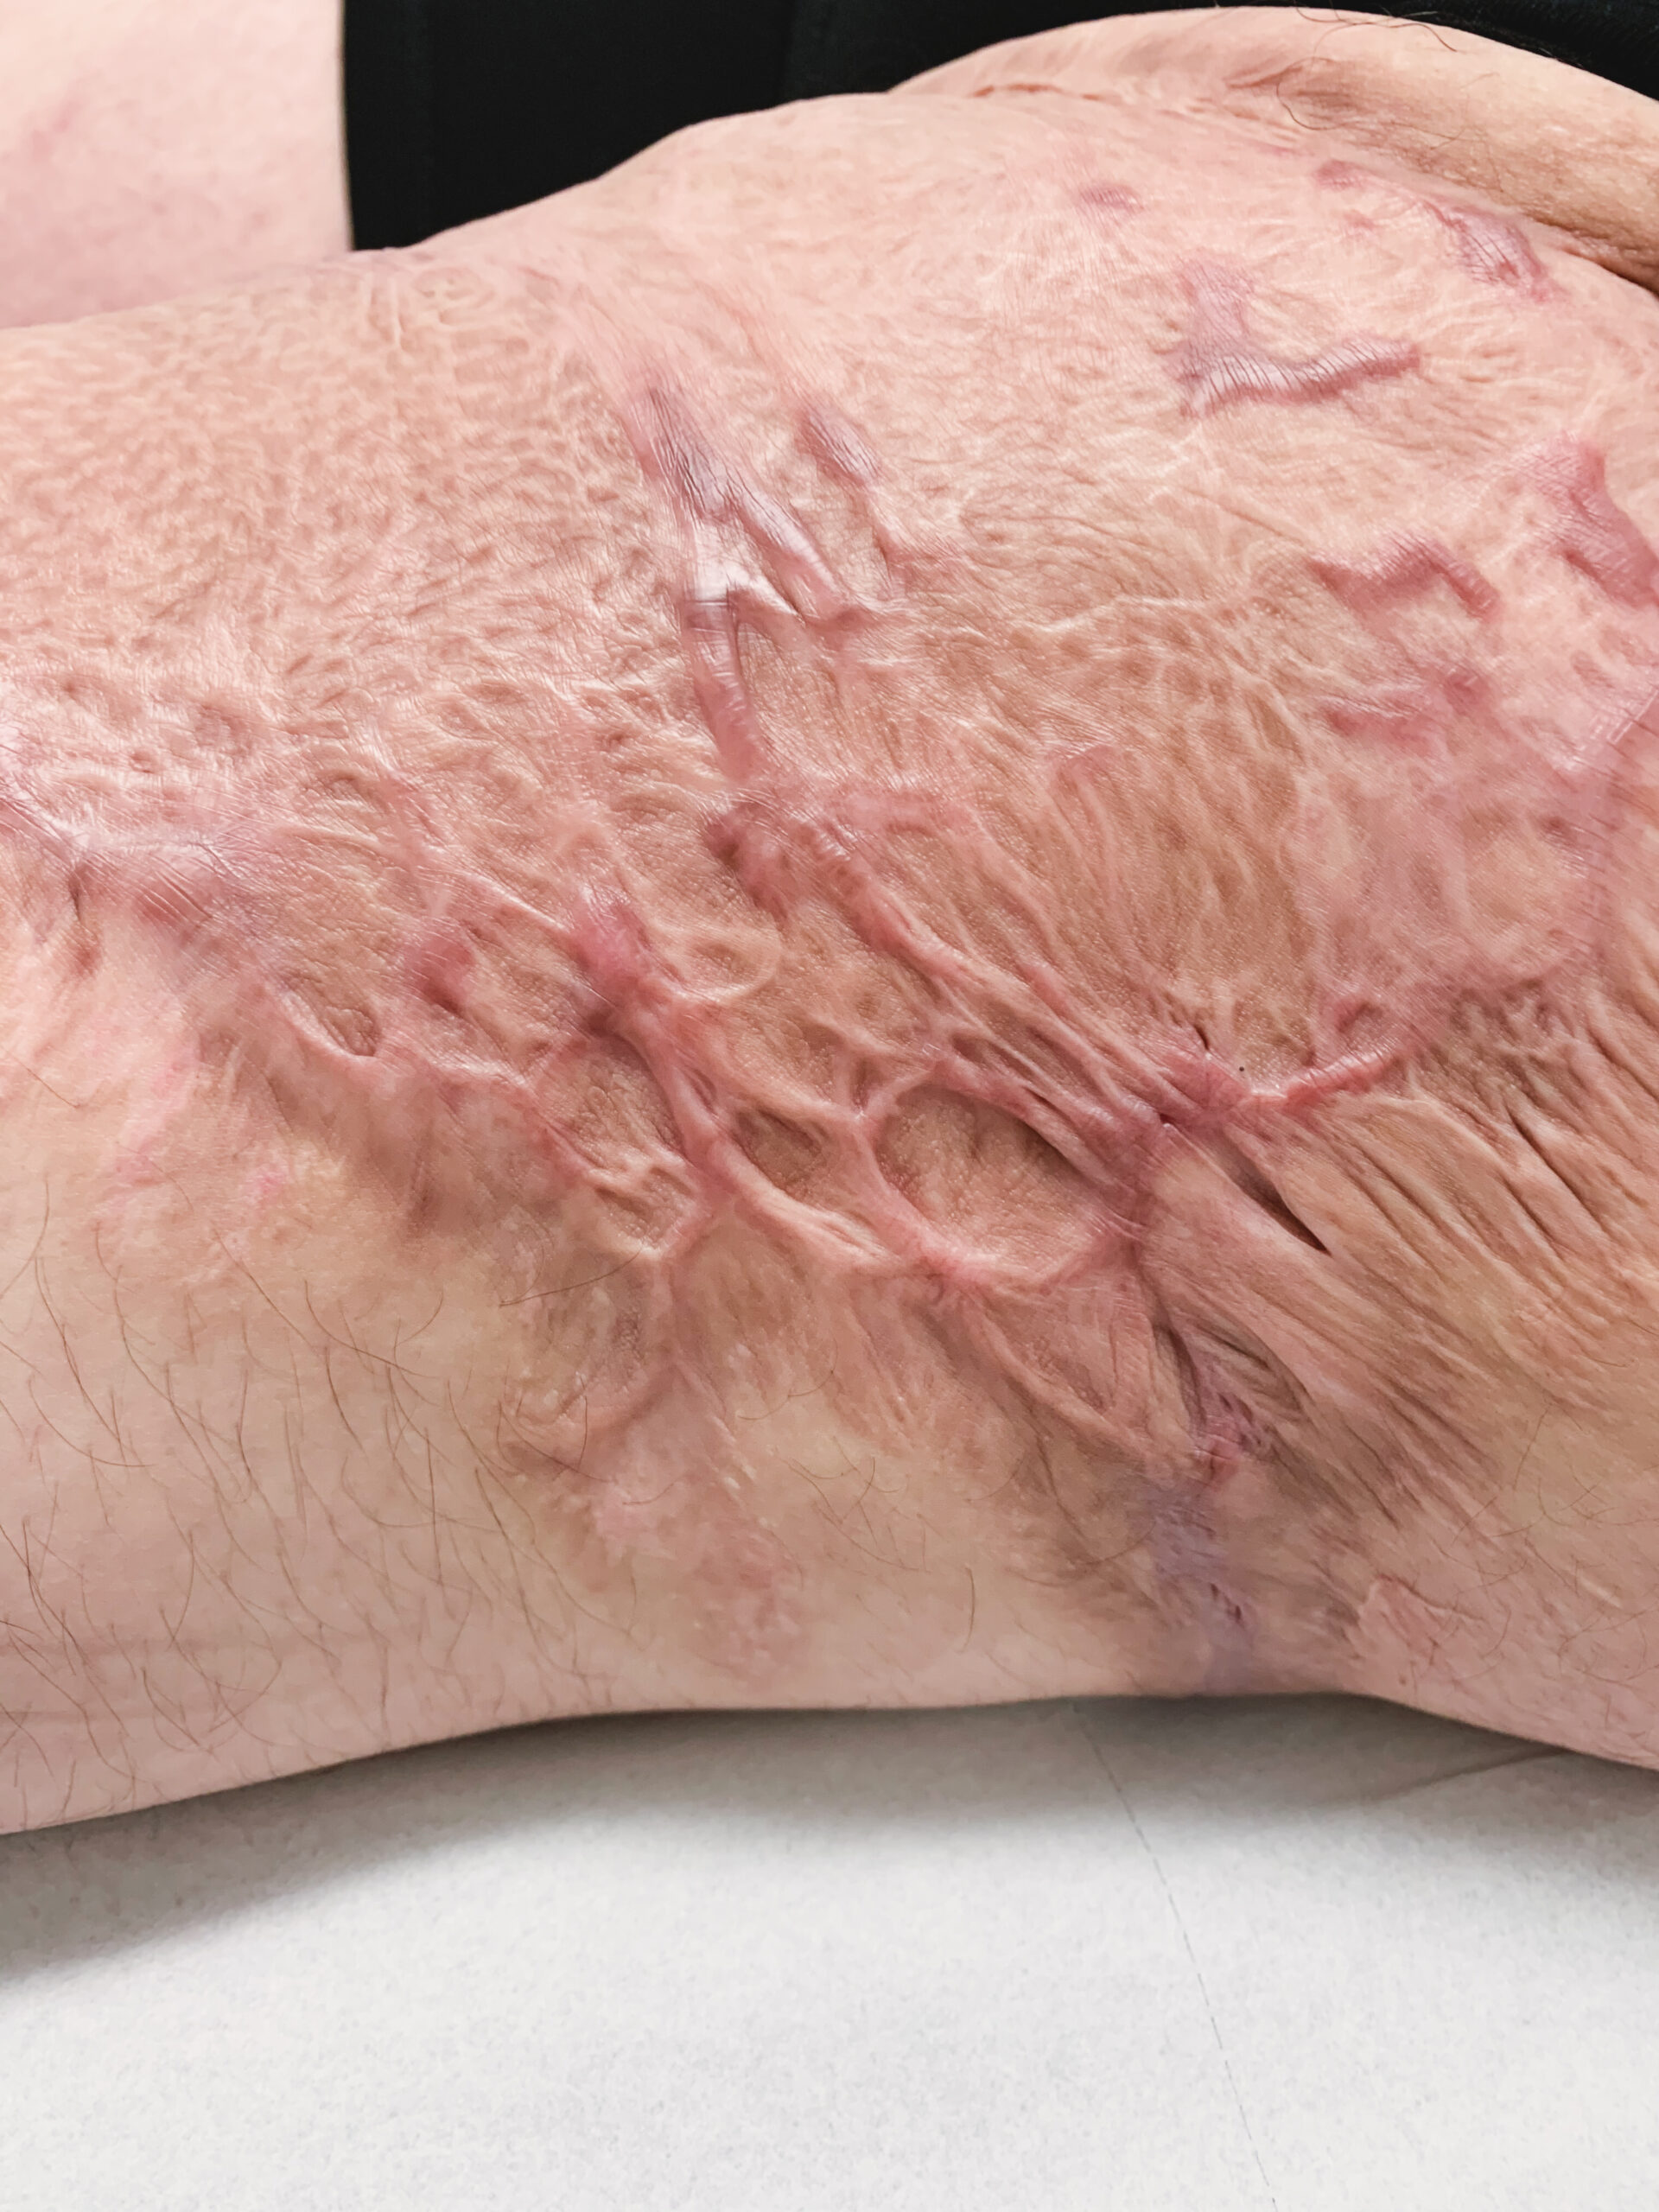 A scar on the leg with texture